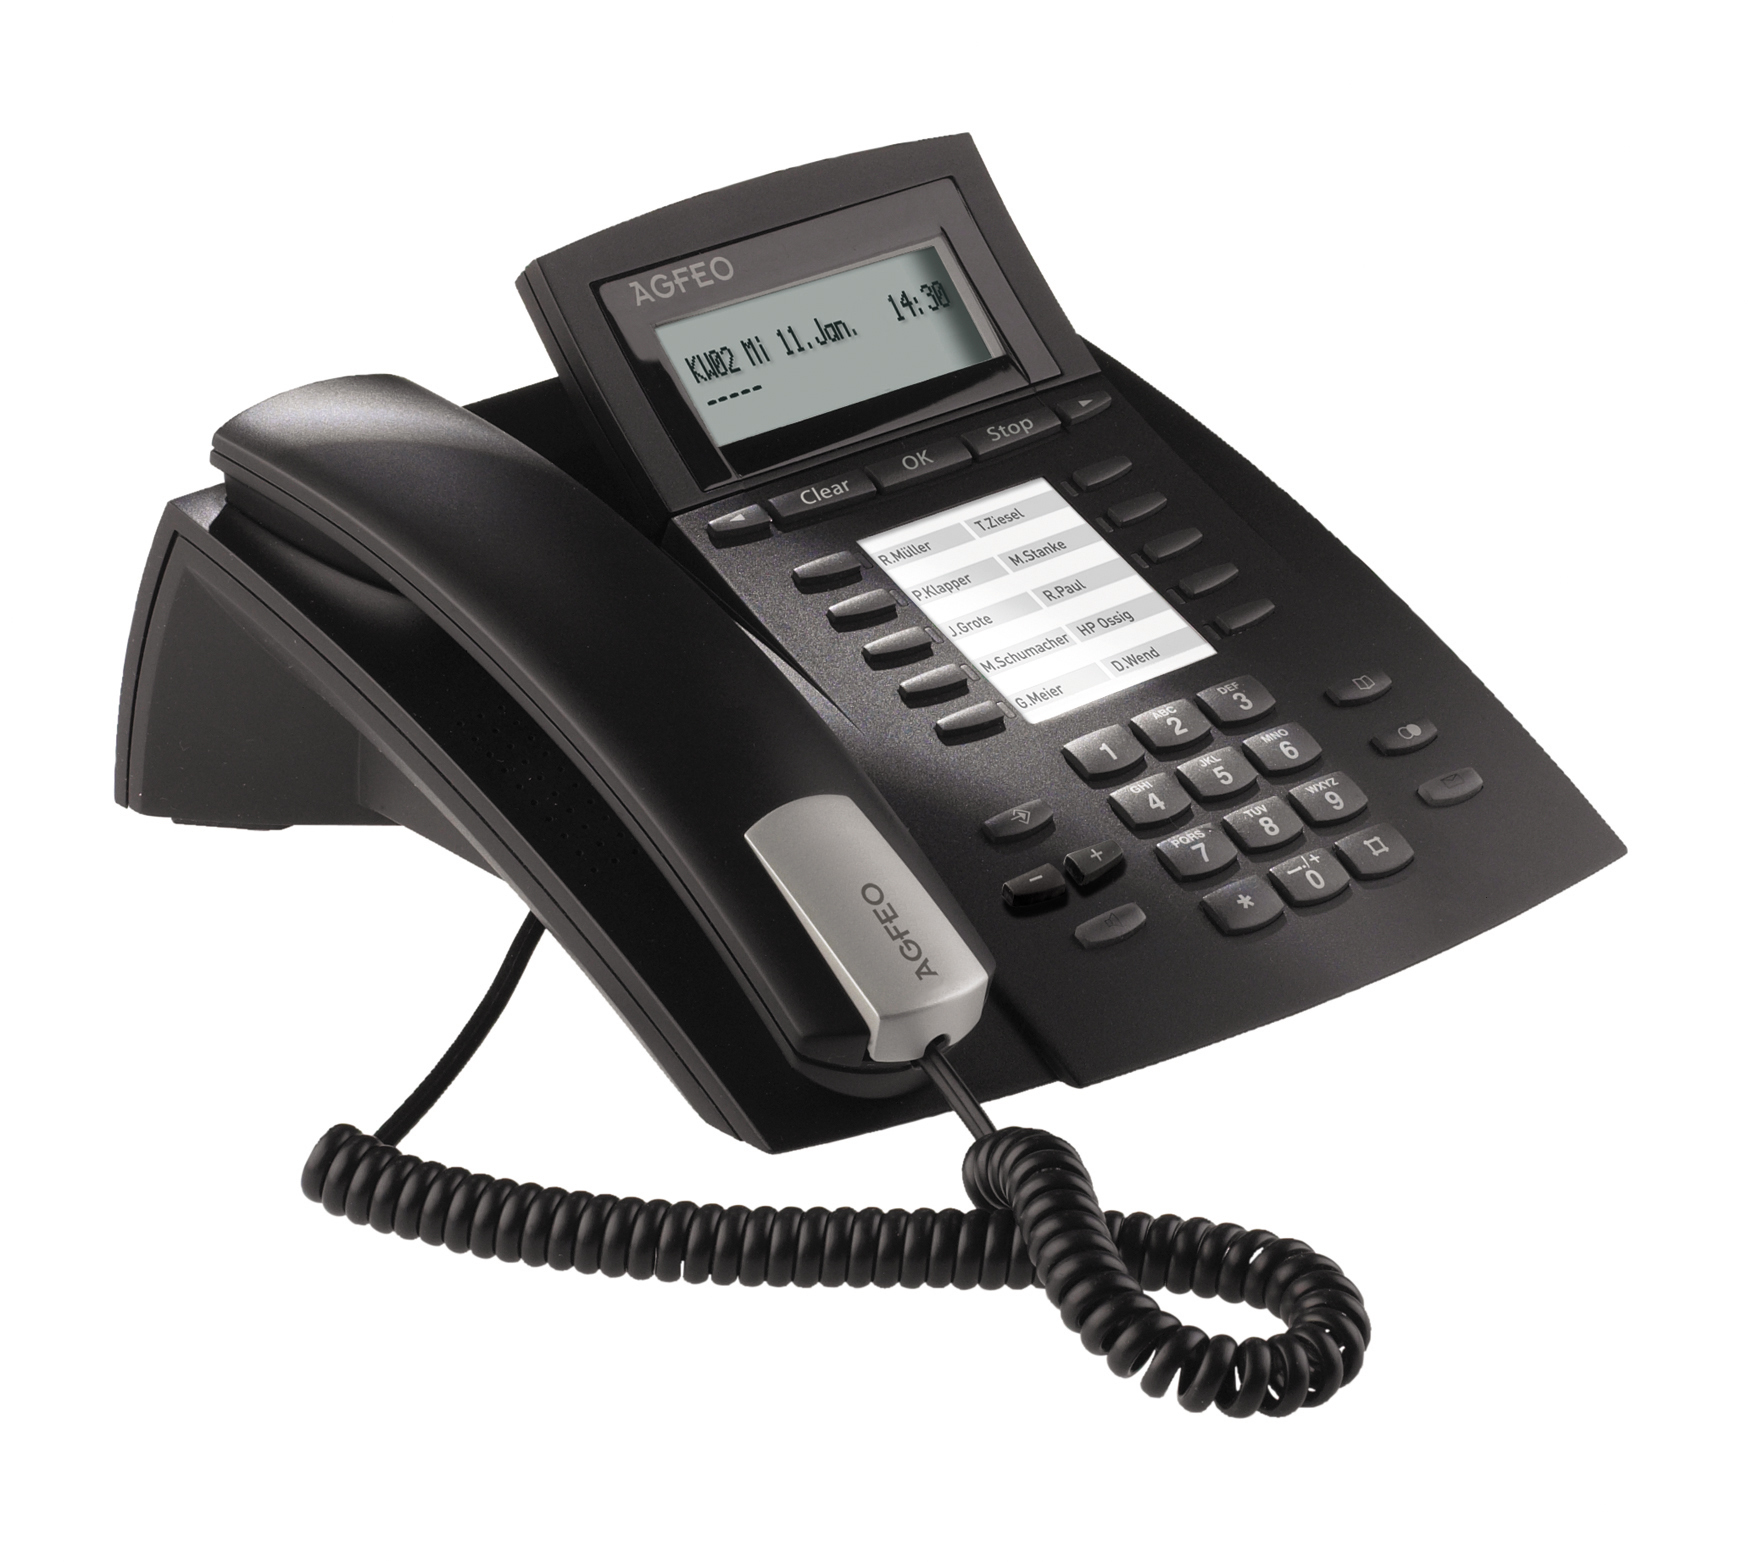 6101424 AGFEO ST 22 - IP Phone - Black - Wired handset - Desk/Wall - 2 lines - 1000 entries